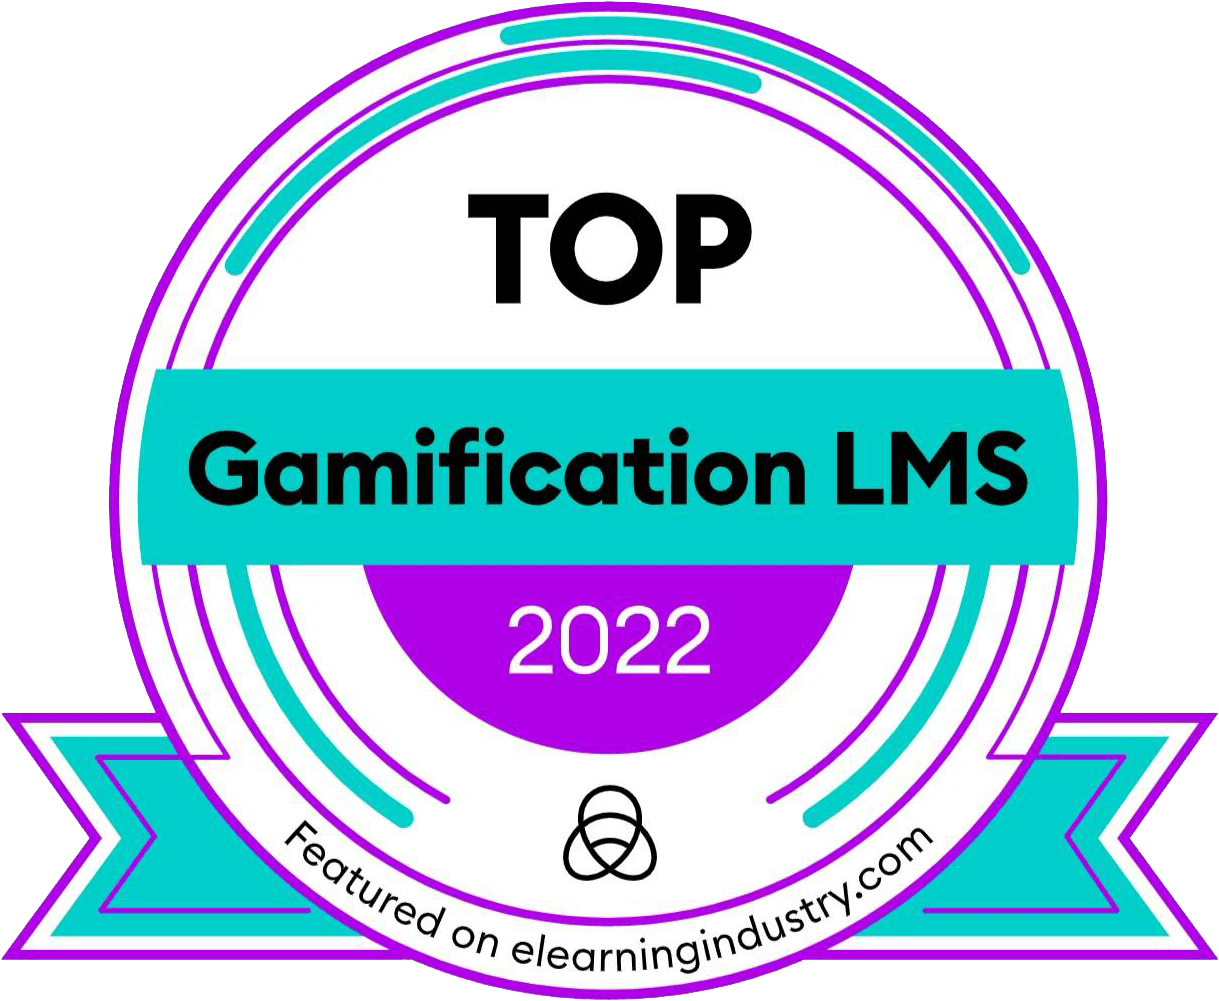 KREDO Recognised as a Top Gamification LMS 2022 by eLearning Industry